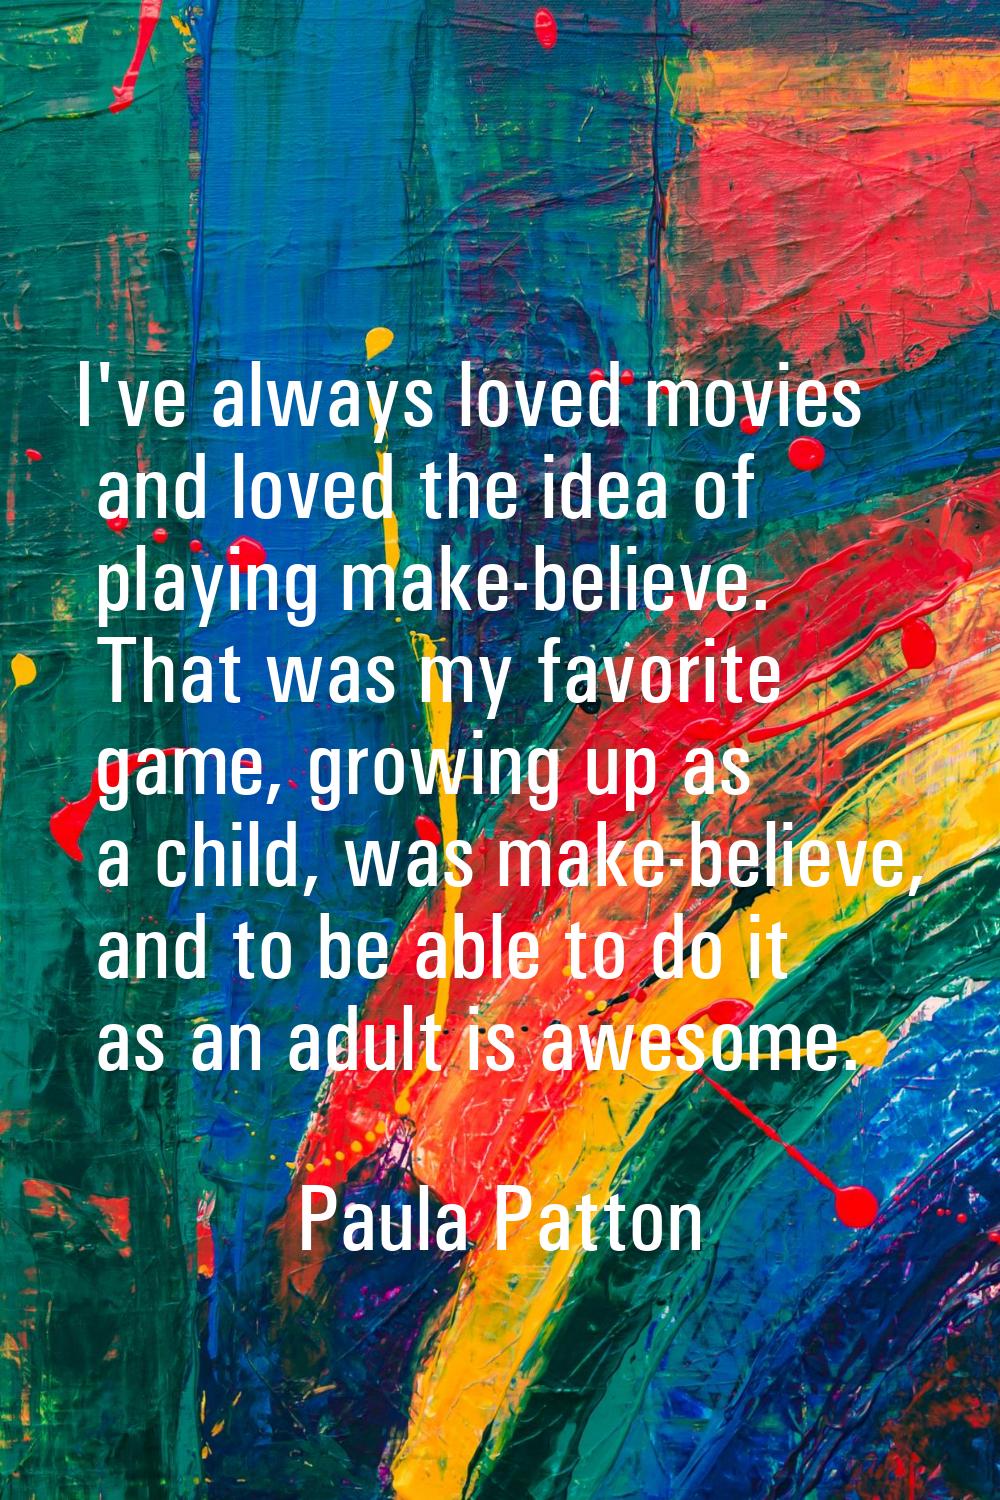 I've always loved movies and loved the idea of playing make-believe. That was my favorite game, gro